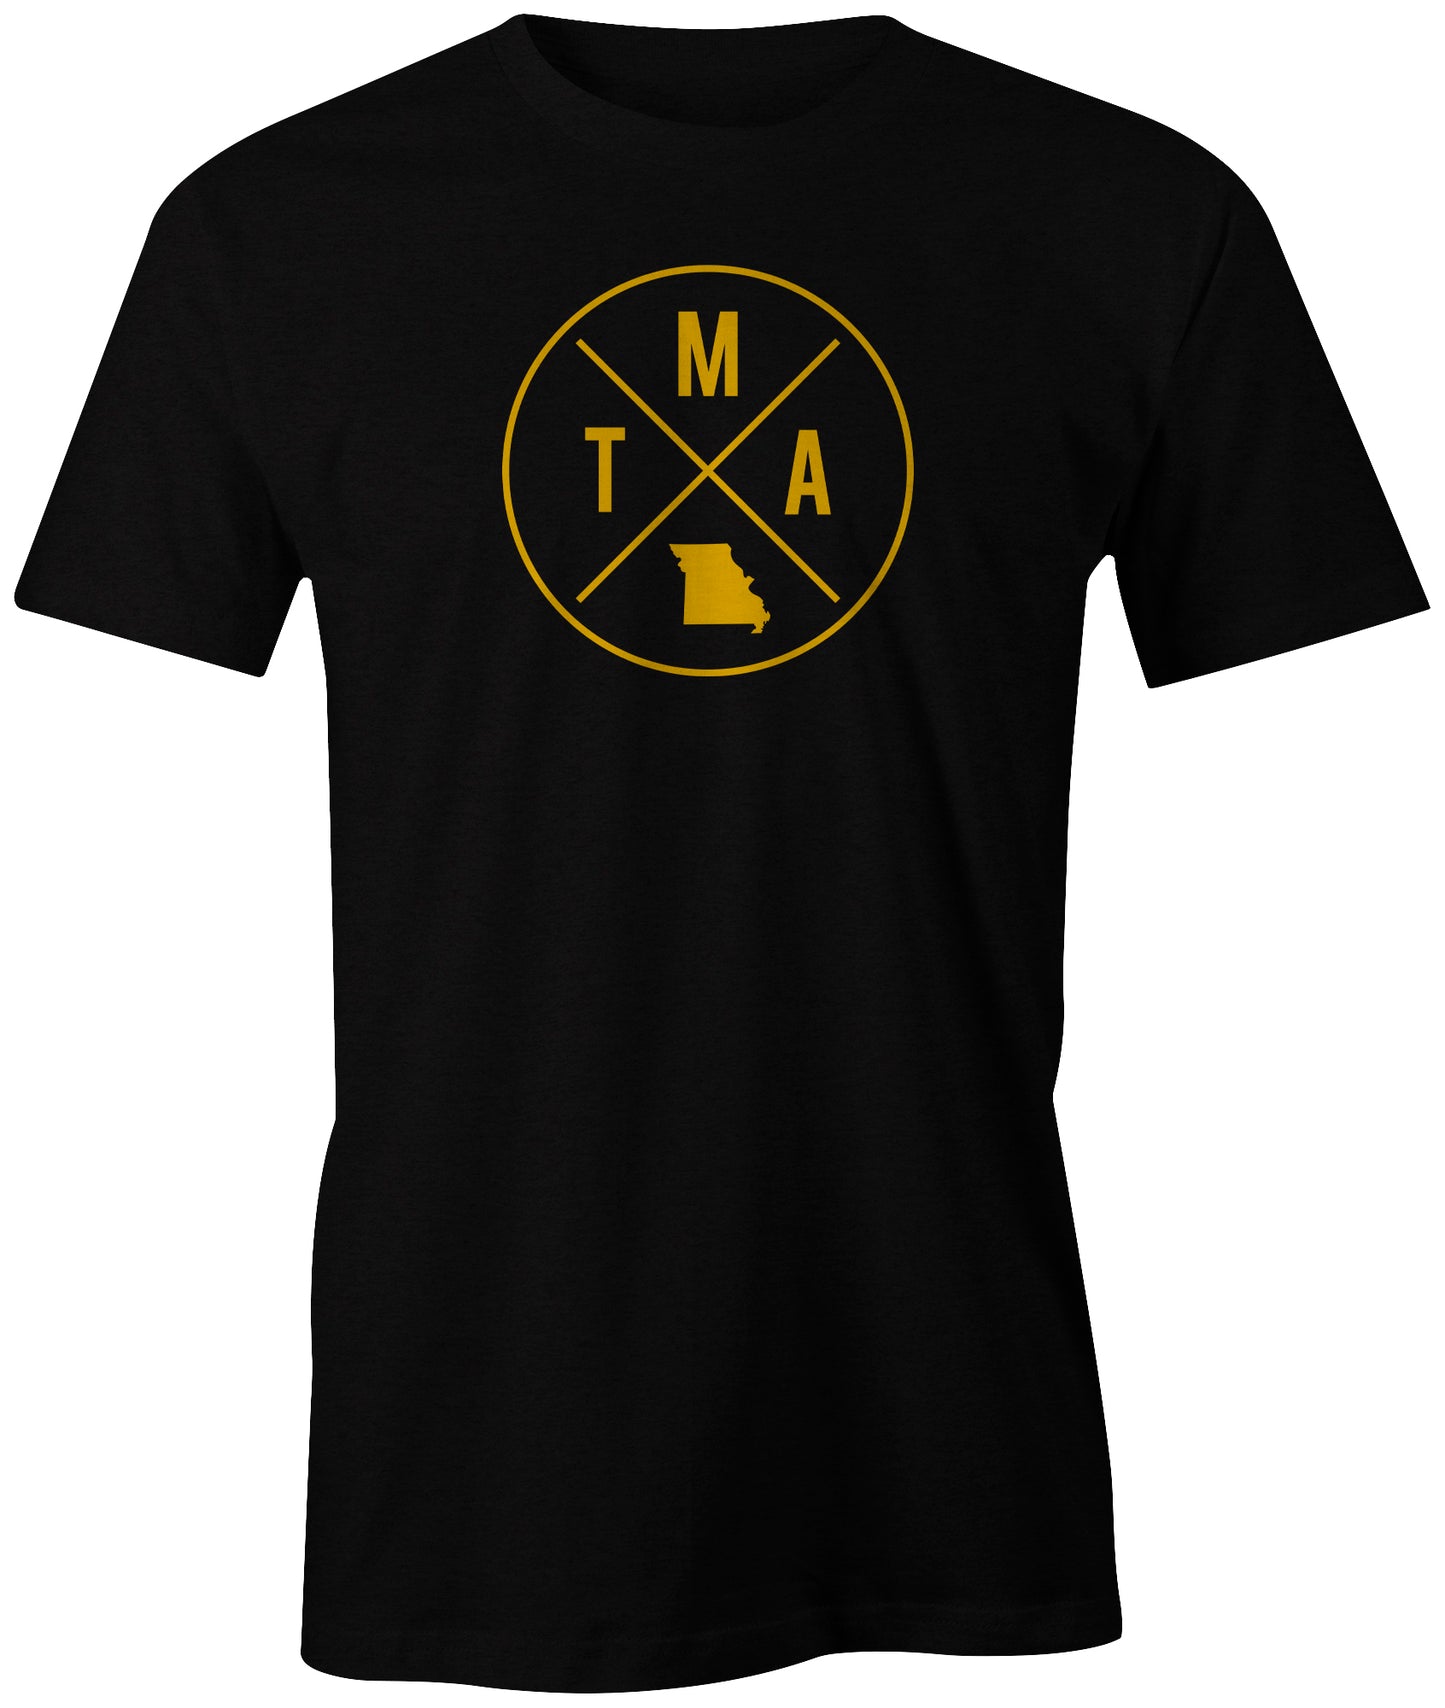 Enjoy this Missouri Edition of the TMA Classic tee! St Louis Cardinals Red and white. St. Louis Blues Blue and yellow University of Missouri black and yellow. Mizzou. St. louis morning radio show. the morning after. tim mckernon, iggy kenny strode, jackson burkett, doug vaughn